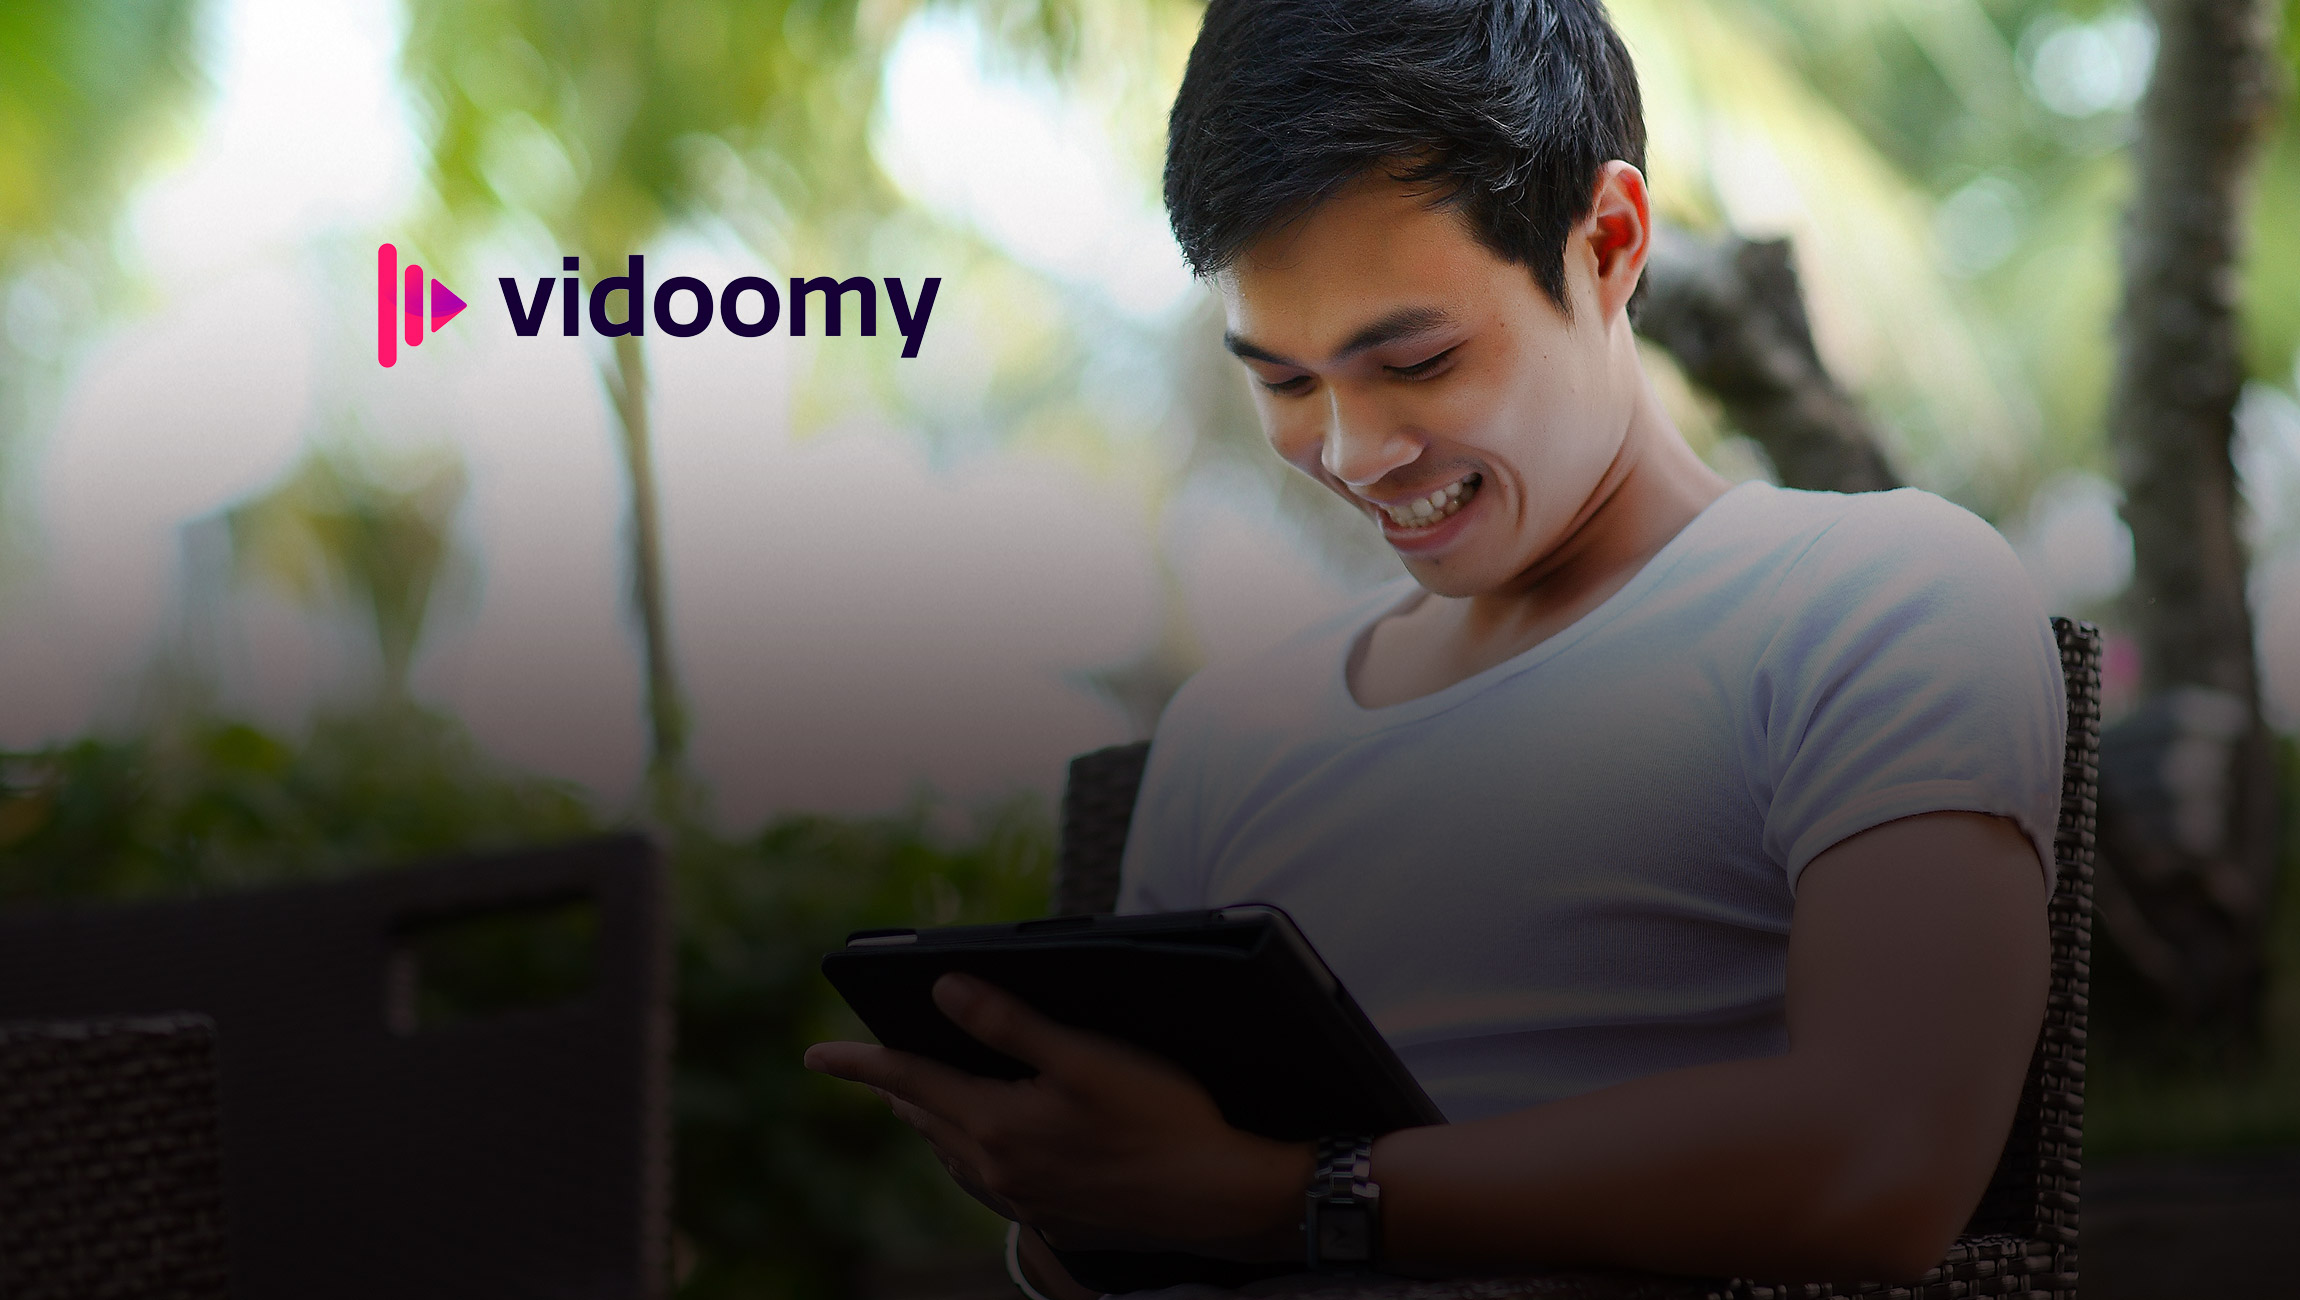 Vidoomy Includes Evaluations And Reviews As Part Of Its Algorithm